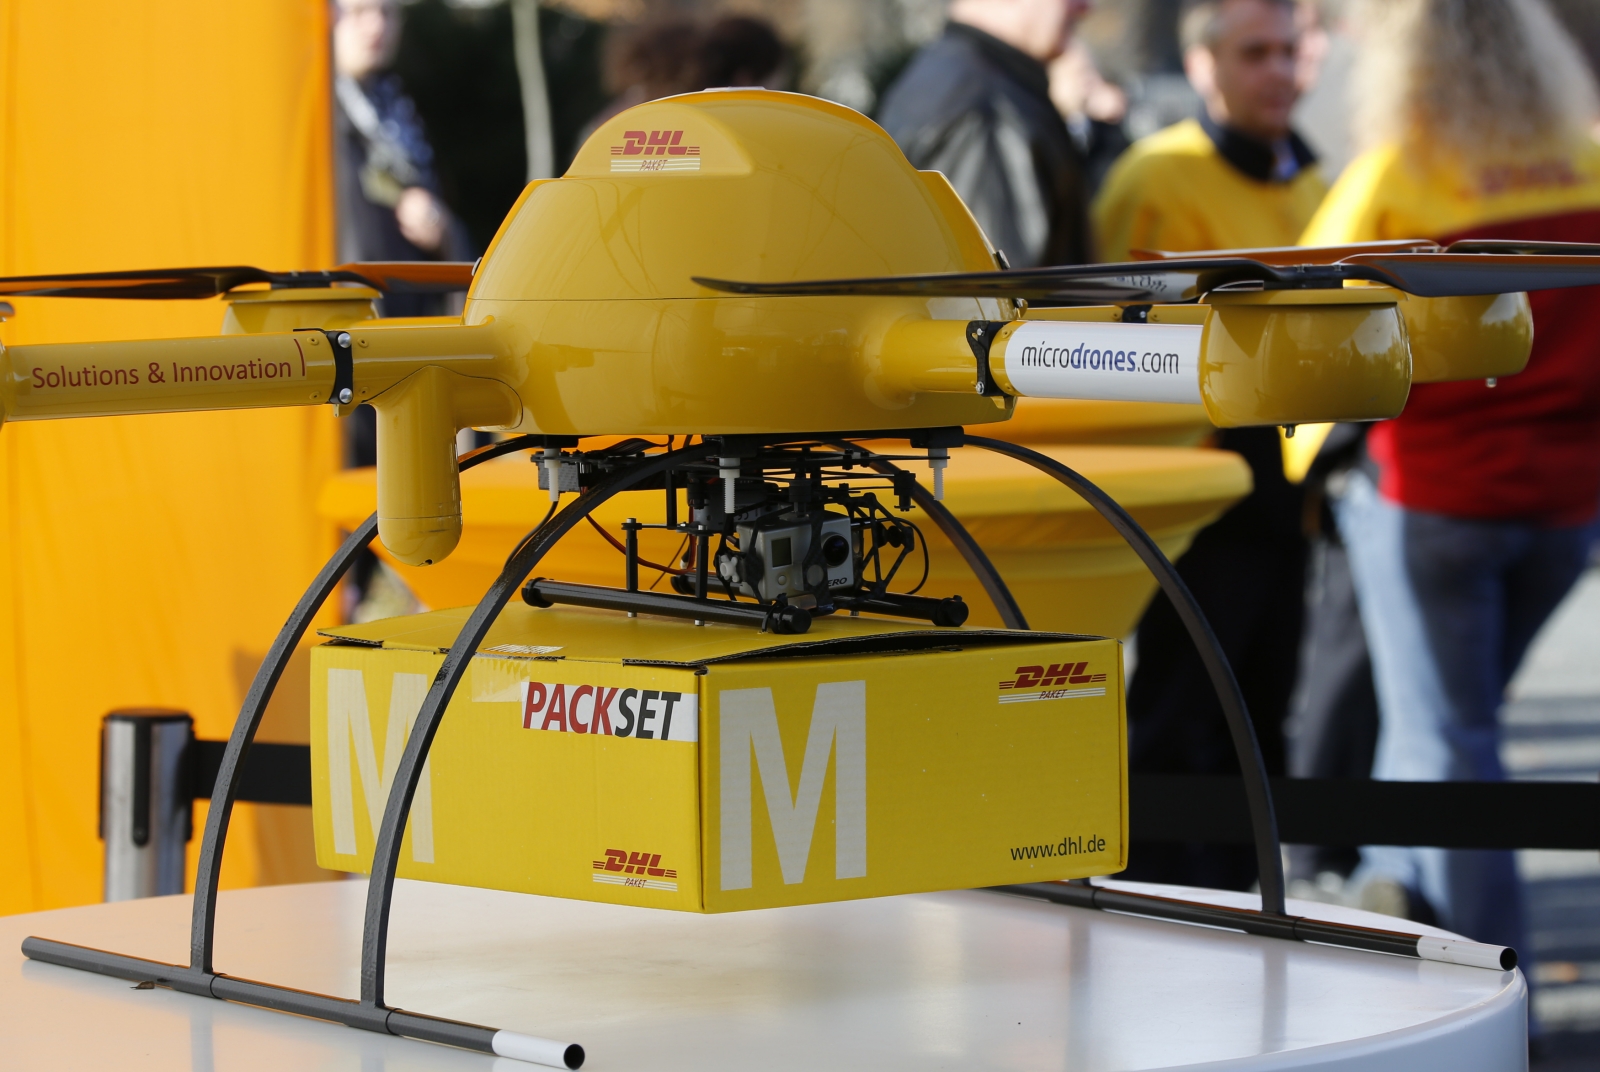 DHL's Paketkopter drone - a new month-long trial will see the drone being flown over 7.5 miles to deliver medication to a remote German island